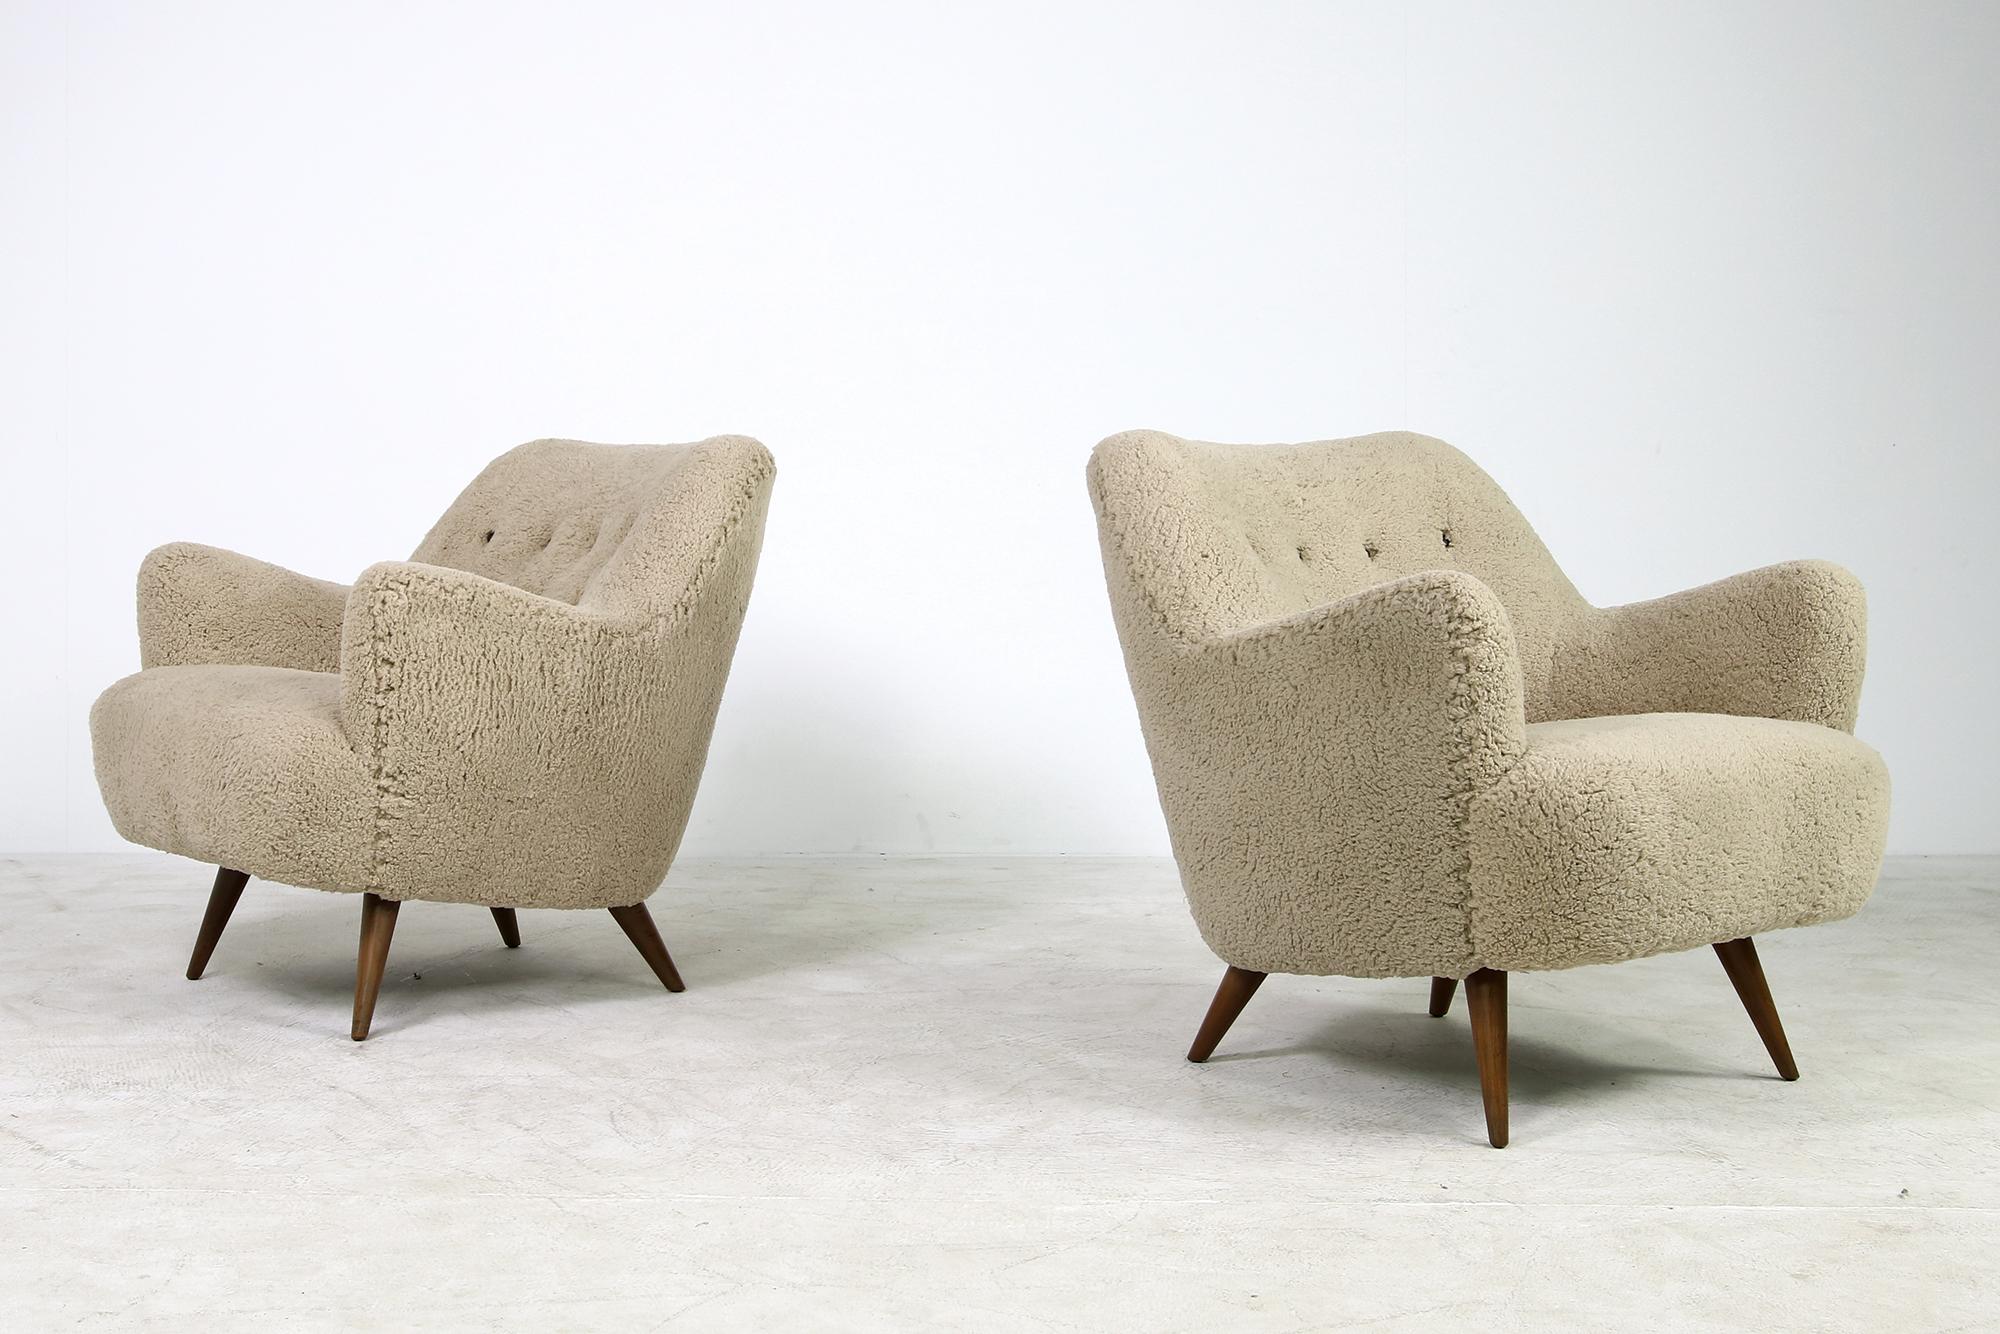 Beautiful and very rare, maybe unique 1950s pair of organic lounge chairs, design attrib. to Frits Schlegel, produced in Denmark around 1950. New upholstery and covered with new super soft teddy fur fabric, like sheepskin, but a cotton mix fabric,